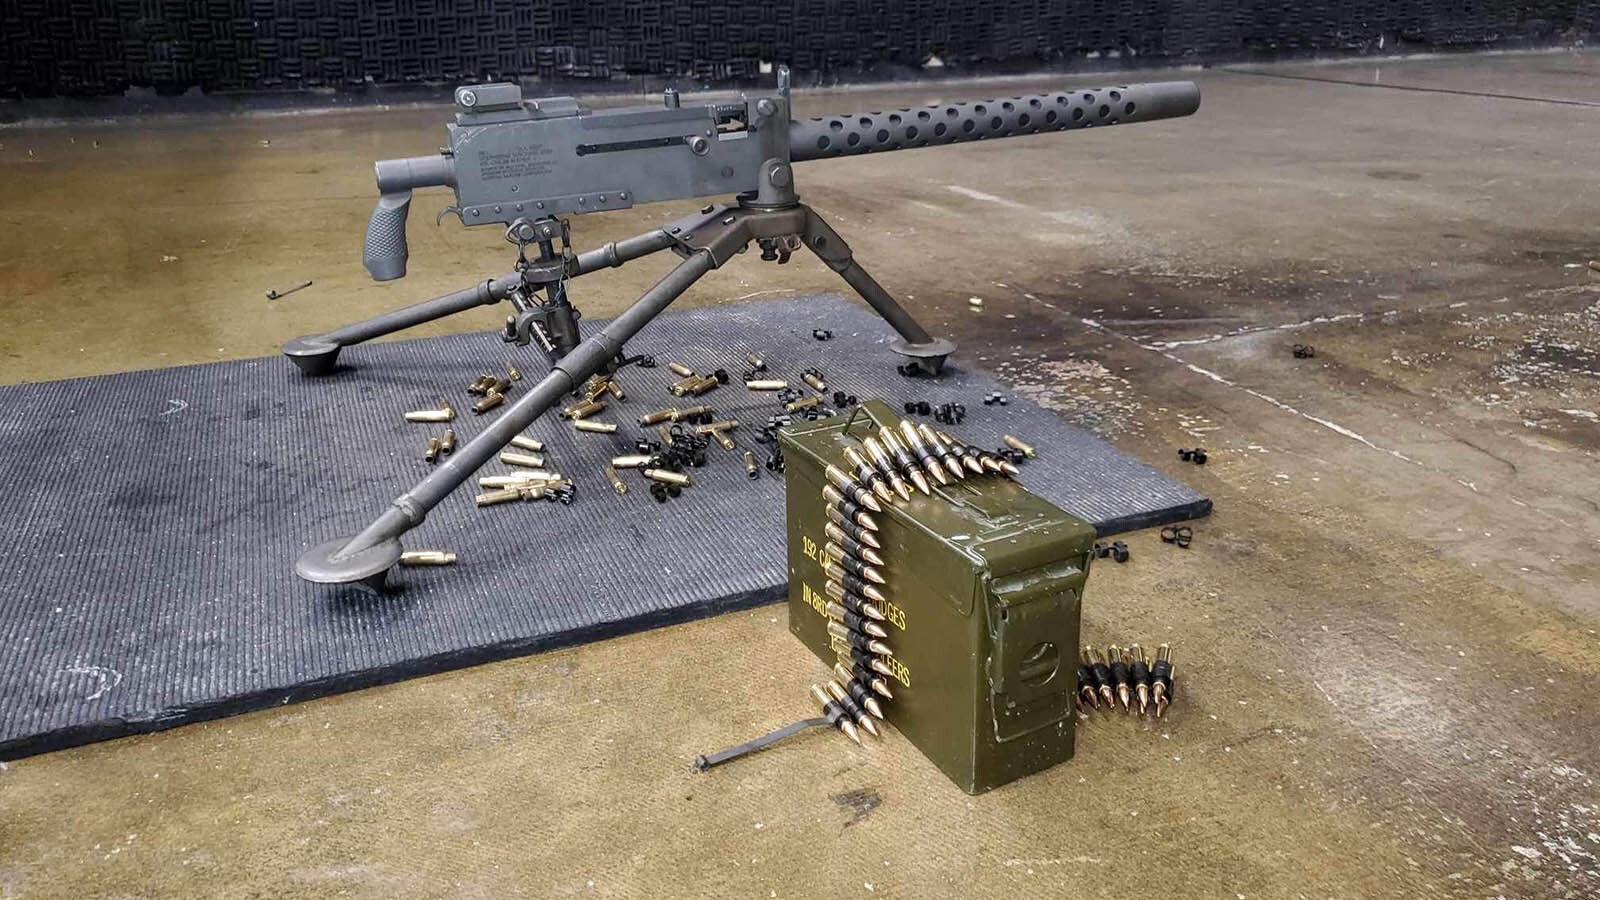 People can shoot this Browning 1919A4 .30-caliber machine gun at Cody Firearms Experience in Cody, Wyoming.